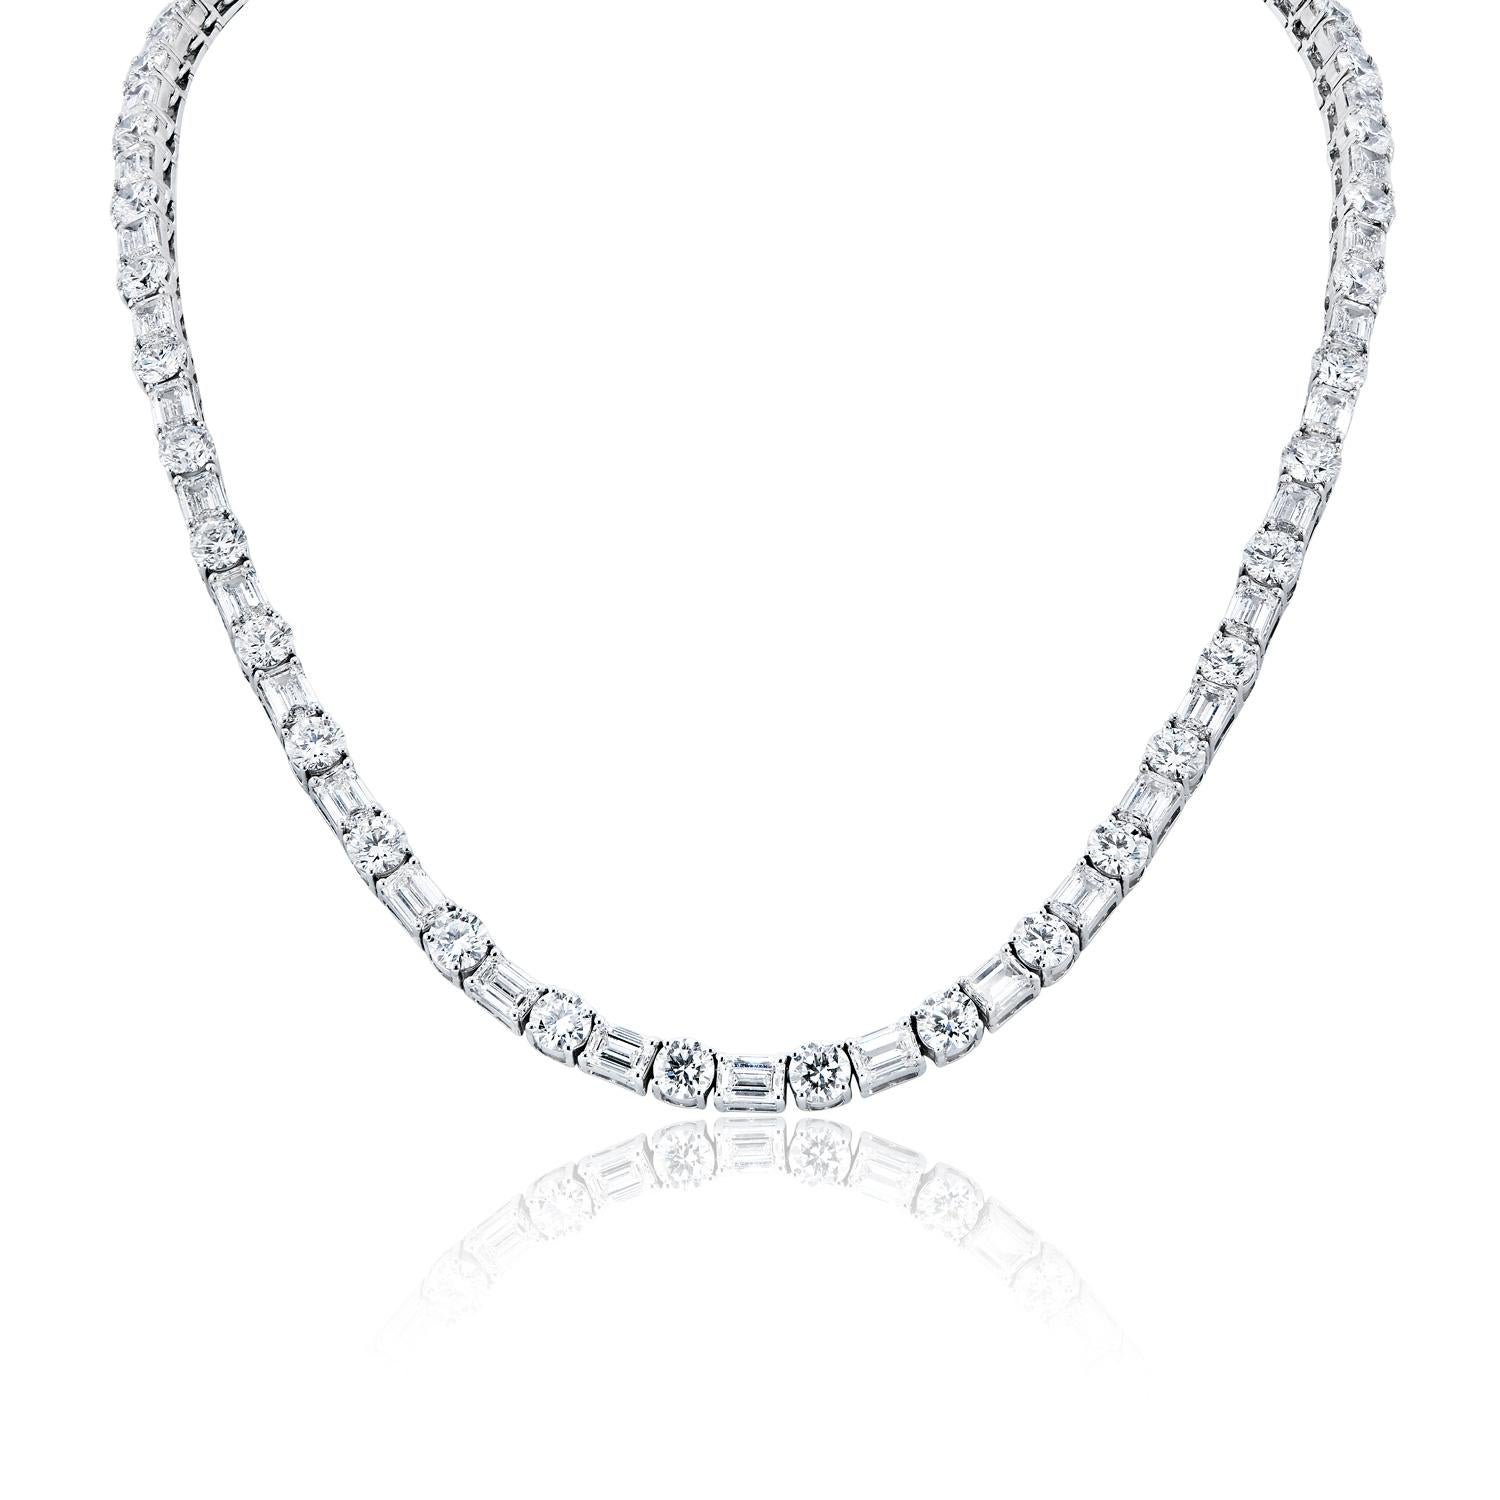 
Carat Weight: 84.42 Carats
Style: Round Brilliant Cut and Emerald Cut (Combine Mix Shape)
Chains: 14 Karat White Gold 93.10 Grams

22 inch Long Diamond Tennis Necklace with Emerald cut and Round Diamonds
